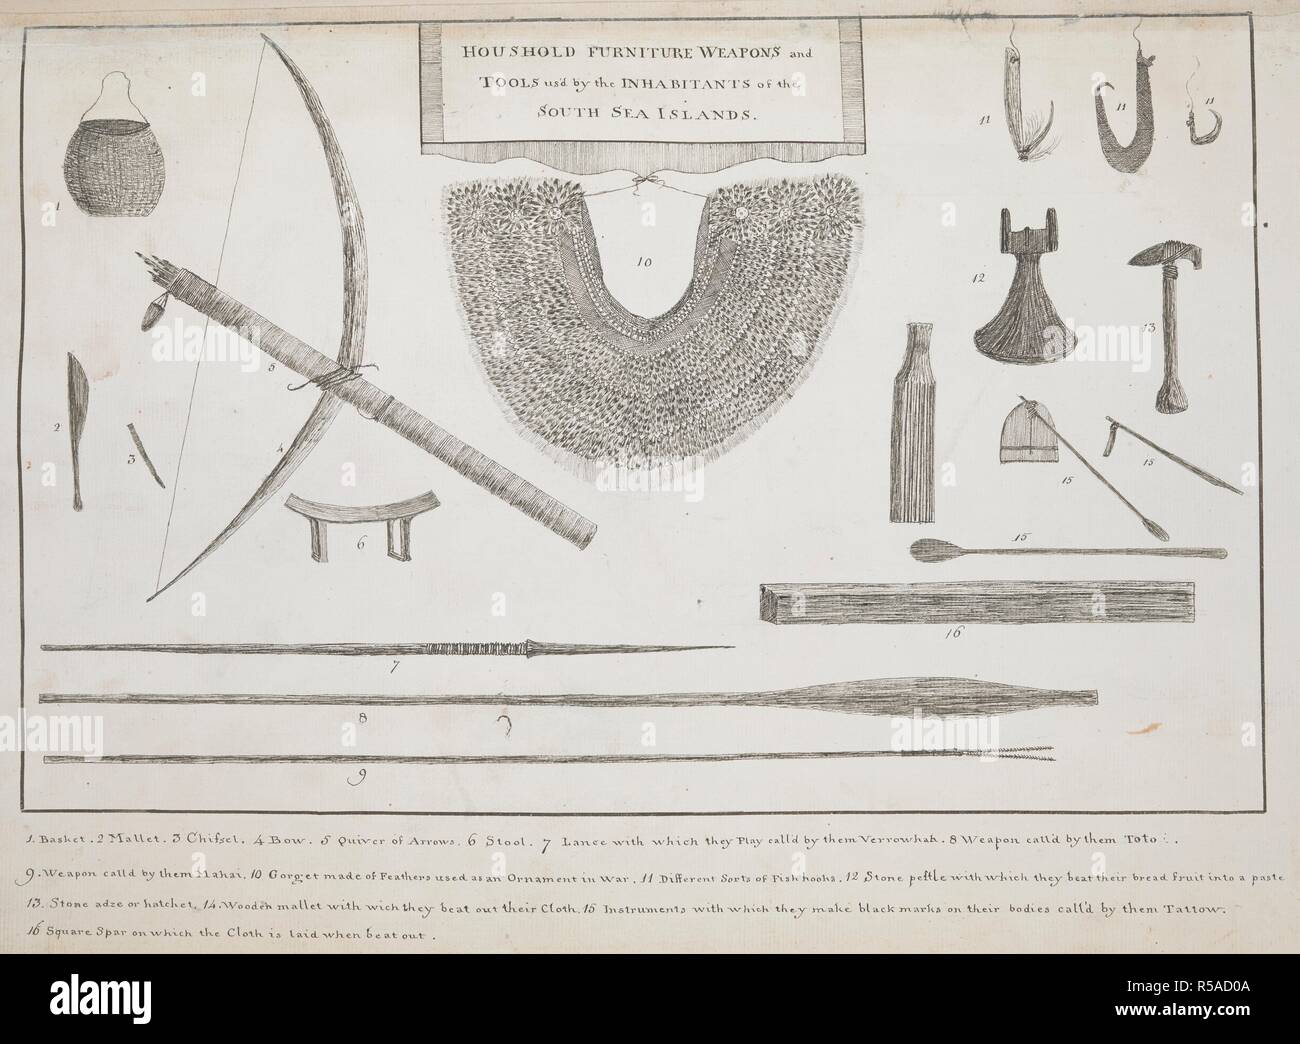 Household furniture, weapons and tools used by the inhabitants of the South Sea islands.  Includes: Basket,Mallet,Chisel,Bow,Quiver of arrows,stool,lance etc. Charts, Plans, Views, and Drawings taken on board the Endeavour during Captain Cook's First Voyage, 1768-1771. 1768-1771. Source: Add. 7085, No.9. Author: COOK, JAMES. Stock Photo